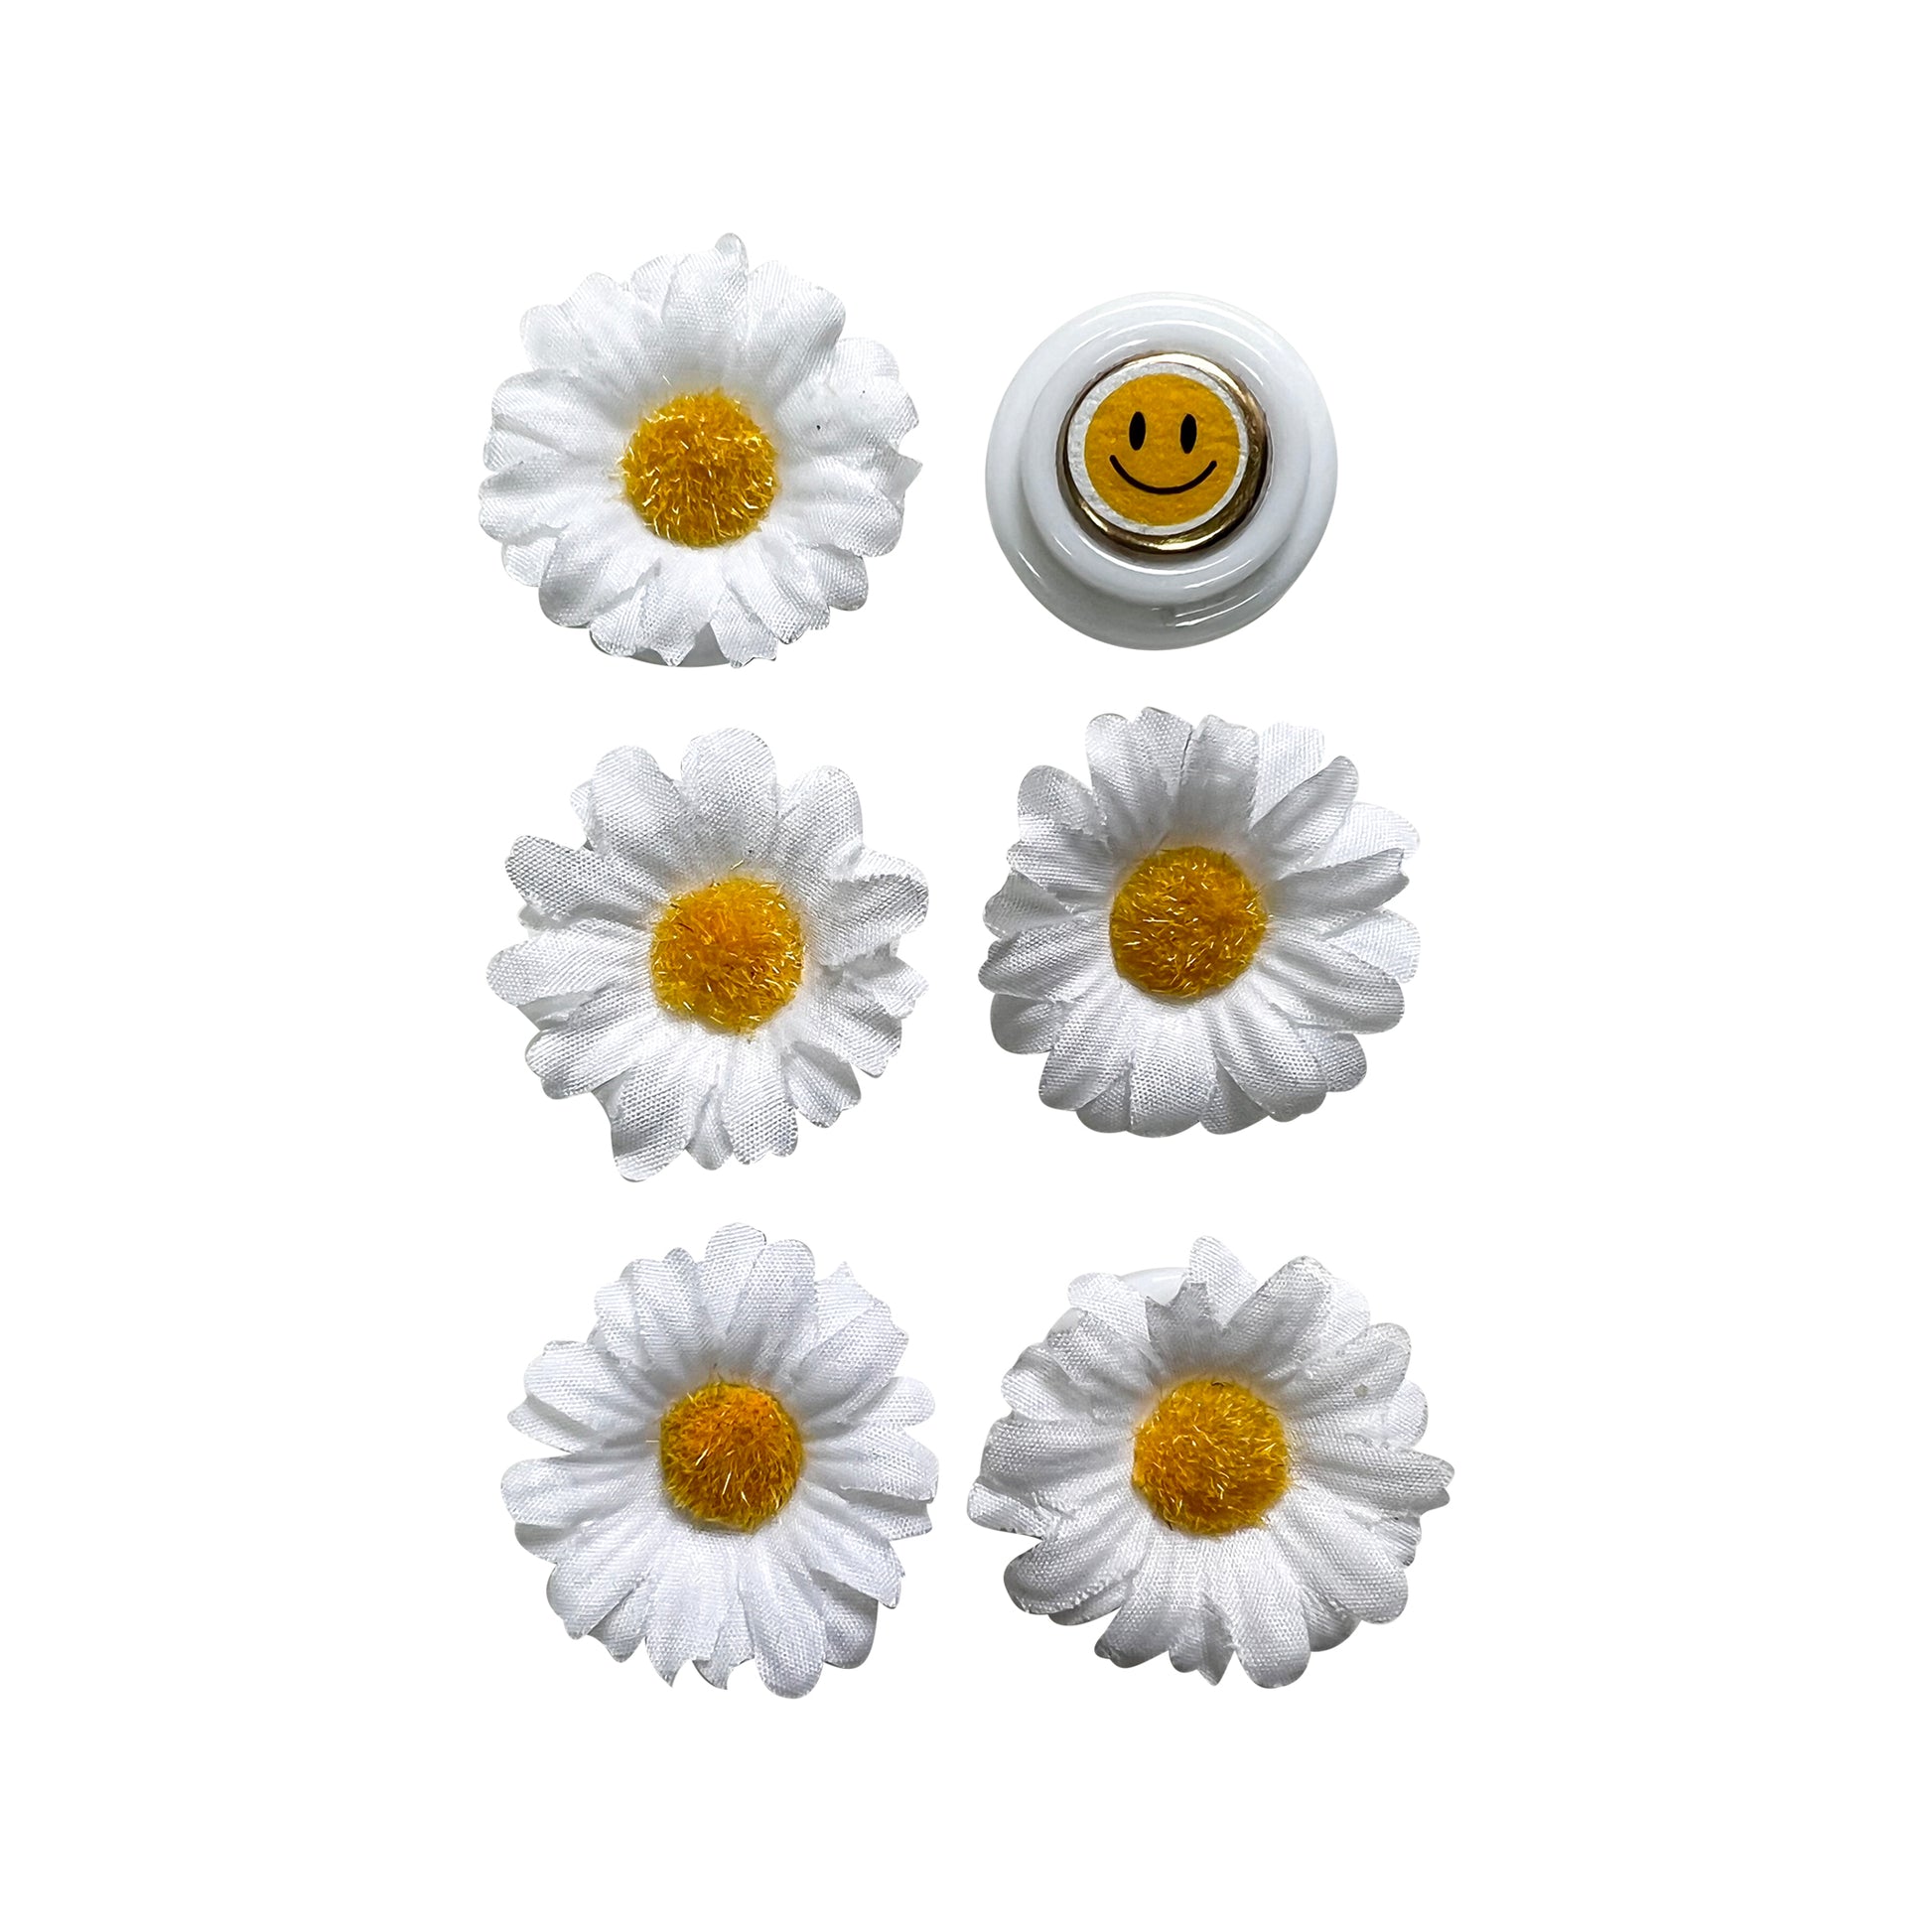 Glass Wrappings' set of 6 white buttons embellishments, 5 with white daisies atop and 1 with a gold smiley face.